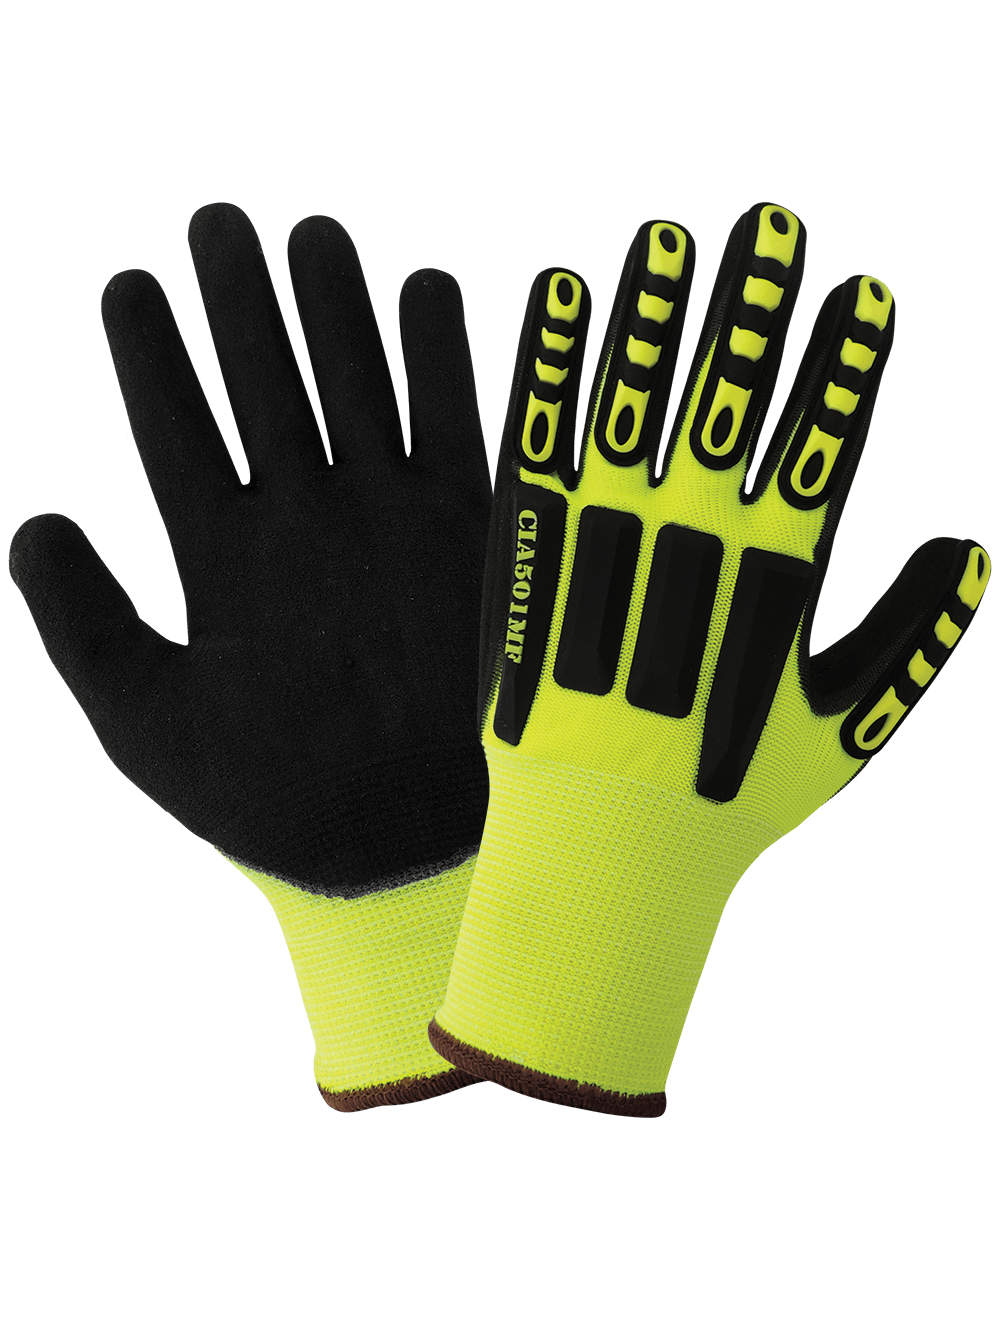 Vise Gripster® C.I.A. High-Visibility Double Mach Finish Nitrile Coated Impact Gloves with Cut, Impact, Abrasion, and Puncture Resistance - CIA501MF